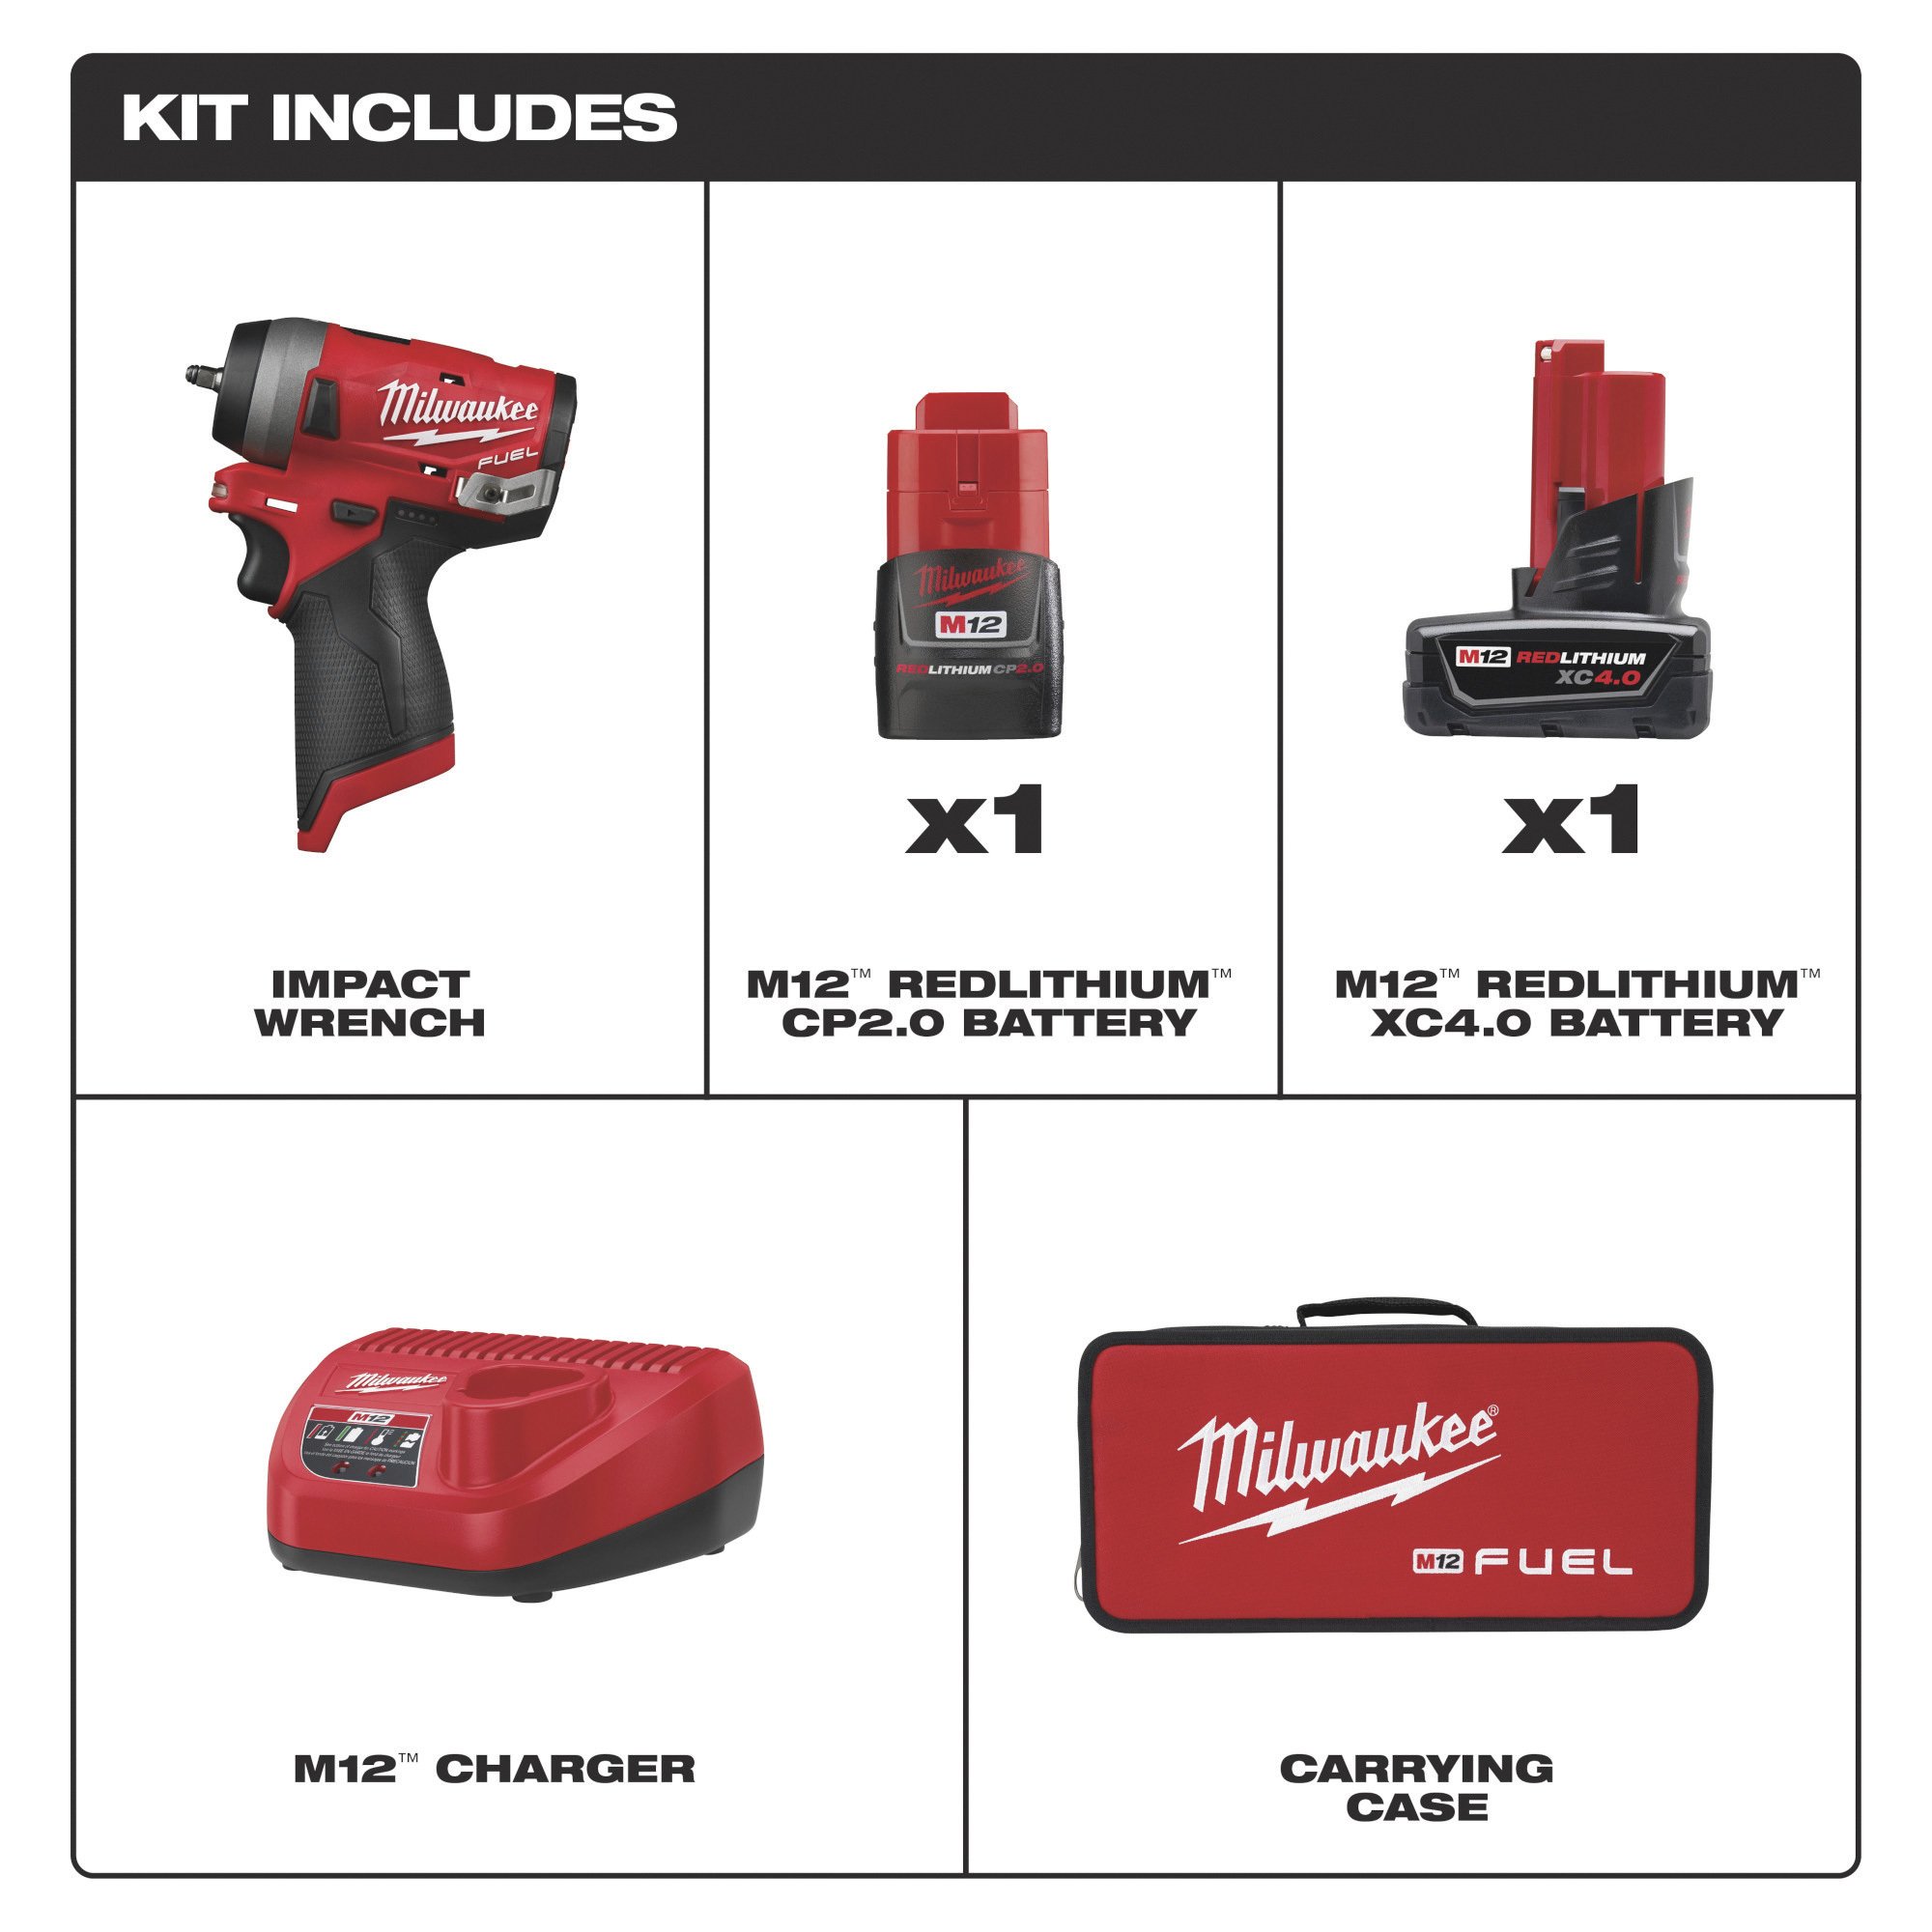 Milwaukee 2552-22 M12 FUEL Brushless Lithium-Ion in. Cordless Stubby Impact Wrench Kit with (1) Ah and (1) Ah Batteries - 4